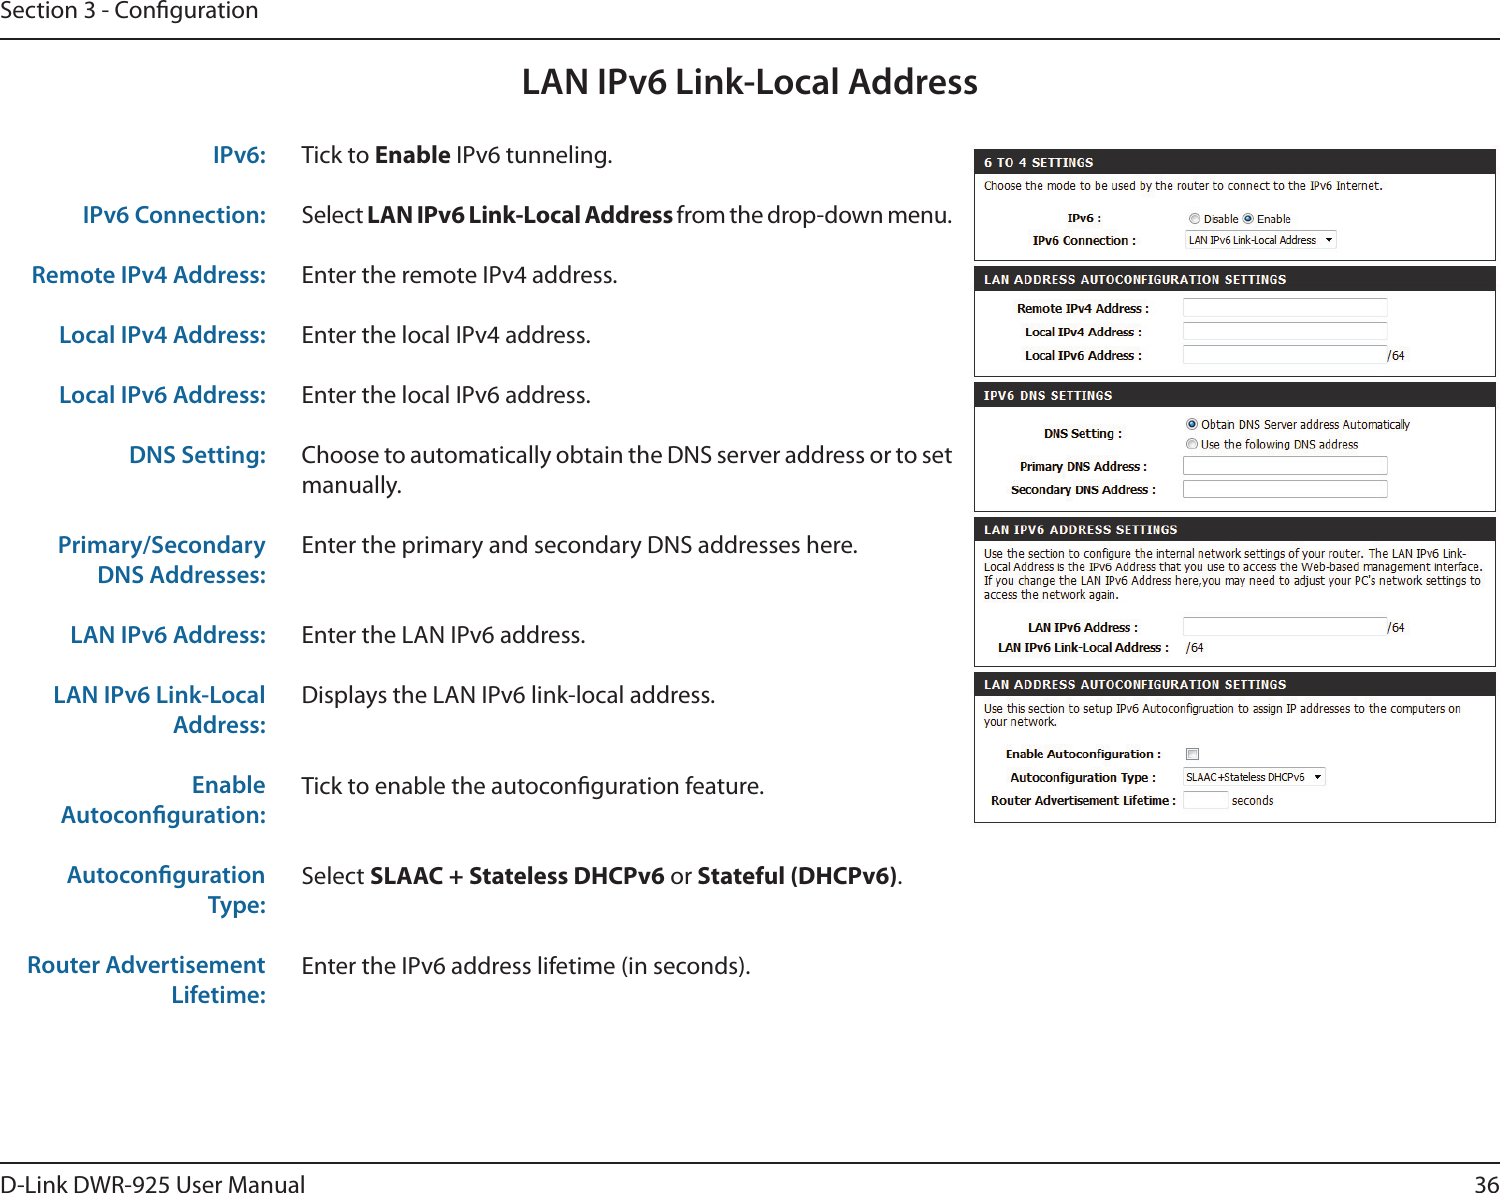 36D-Link DWR-925 User ManualSection 3 - CongurationLAN IPv6 Link-Local AddressTick to Enable IPv6 tunneling.Select LAN IPv6 Link-Local Address from the drop-down menu.Enter the remote IPv4 address.Enter the local IPv4 address.Enter the local IPv6 address.Choose to automatically obtain the DNS server address or to set manually.Enter the primary and secondary DNS addresses here.Enter the LAN IPv6 address.Displays the LAN IPv6 link-local address.Tick to enable the autoconguration feature.Select SLAAC + Stateless DHCPv6 or Stateful (DHCPv6).Enter the IPv6 address lifetime (in seconds).IPv6:IPv6 Connection:Remote IPv4 Address:Local IPv4 Address:Local IPv6 Address:DNS Setting:Primary/Secondary DNS Addresses:LAN IPv6 Address:LAN IPv6 Link-Local Address:Enable Autoconguration:Autoconguration Type:Router Advertisement Lifetime: